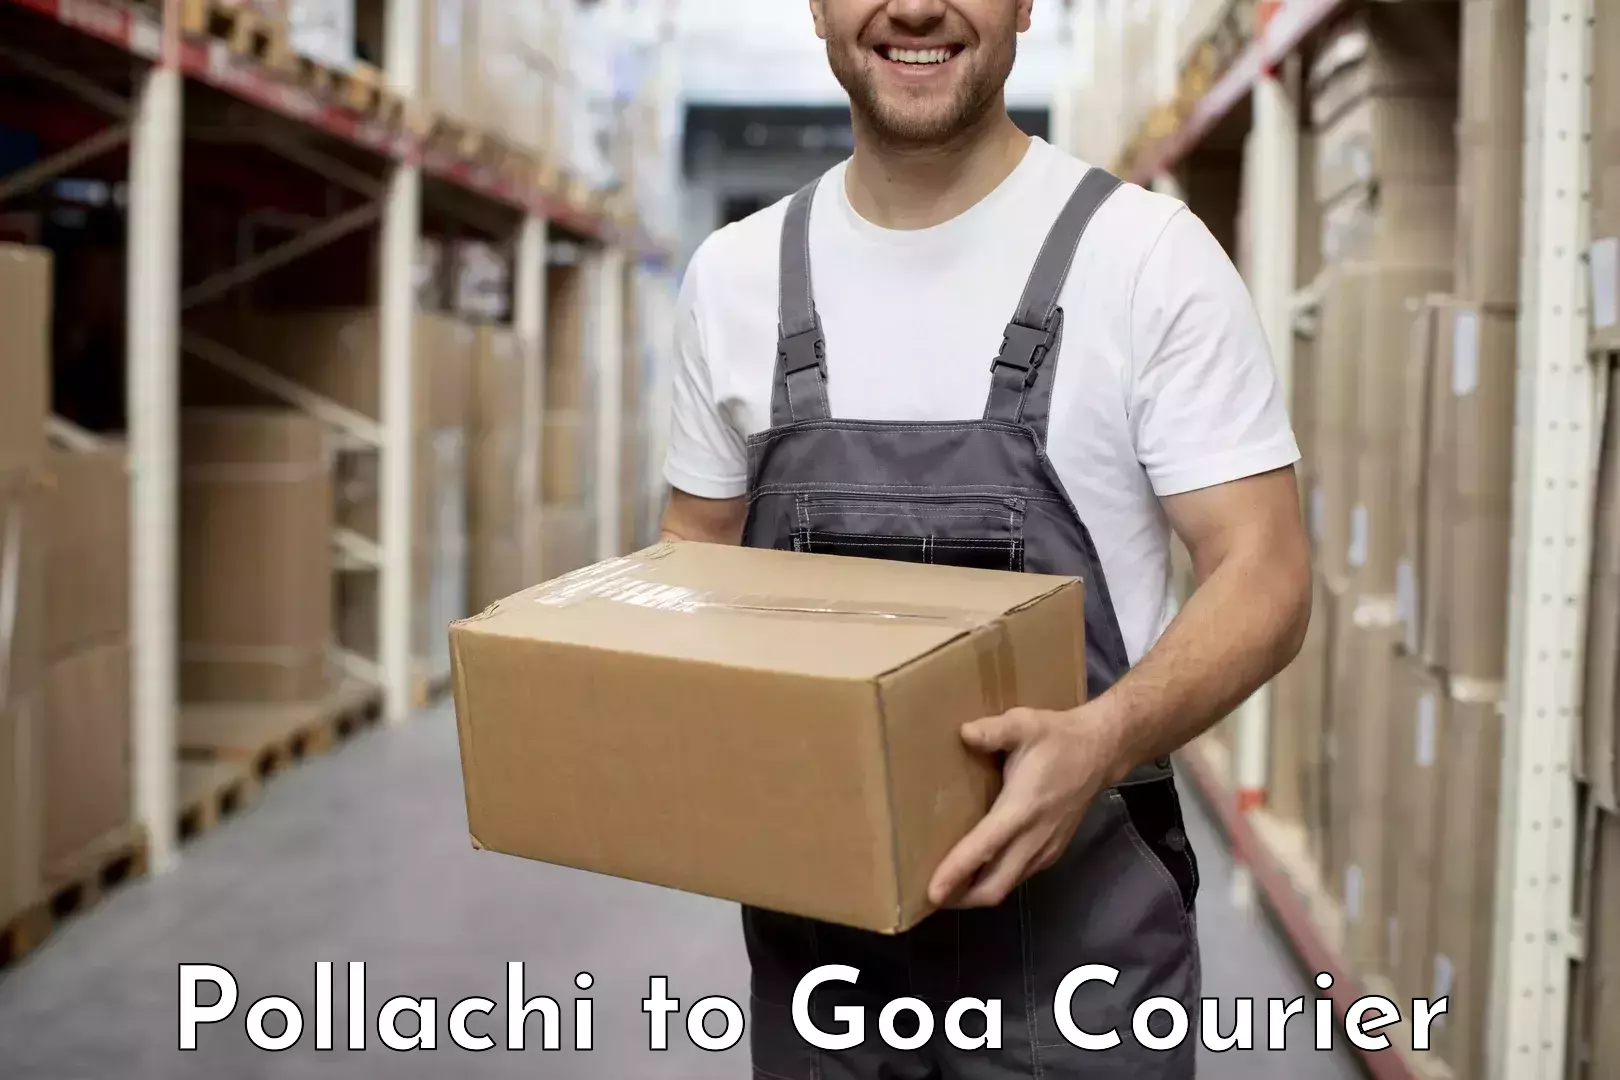 Courier service efficiency Pollachi to Panaji